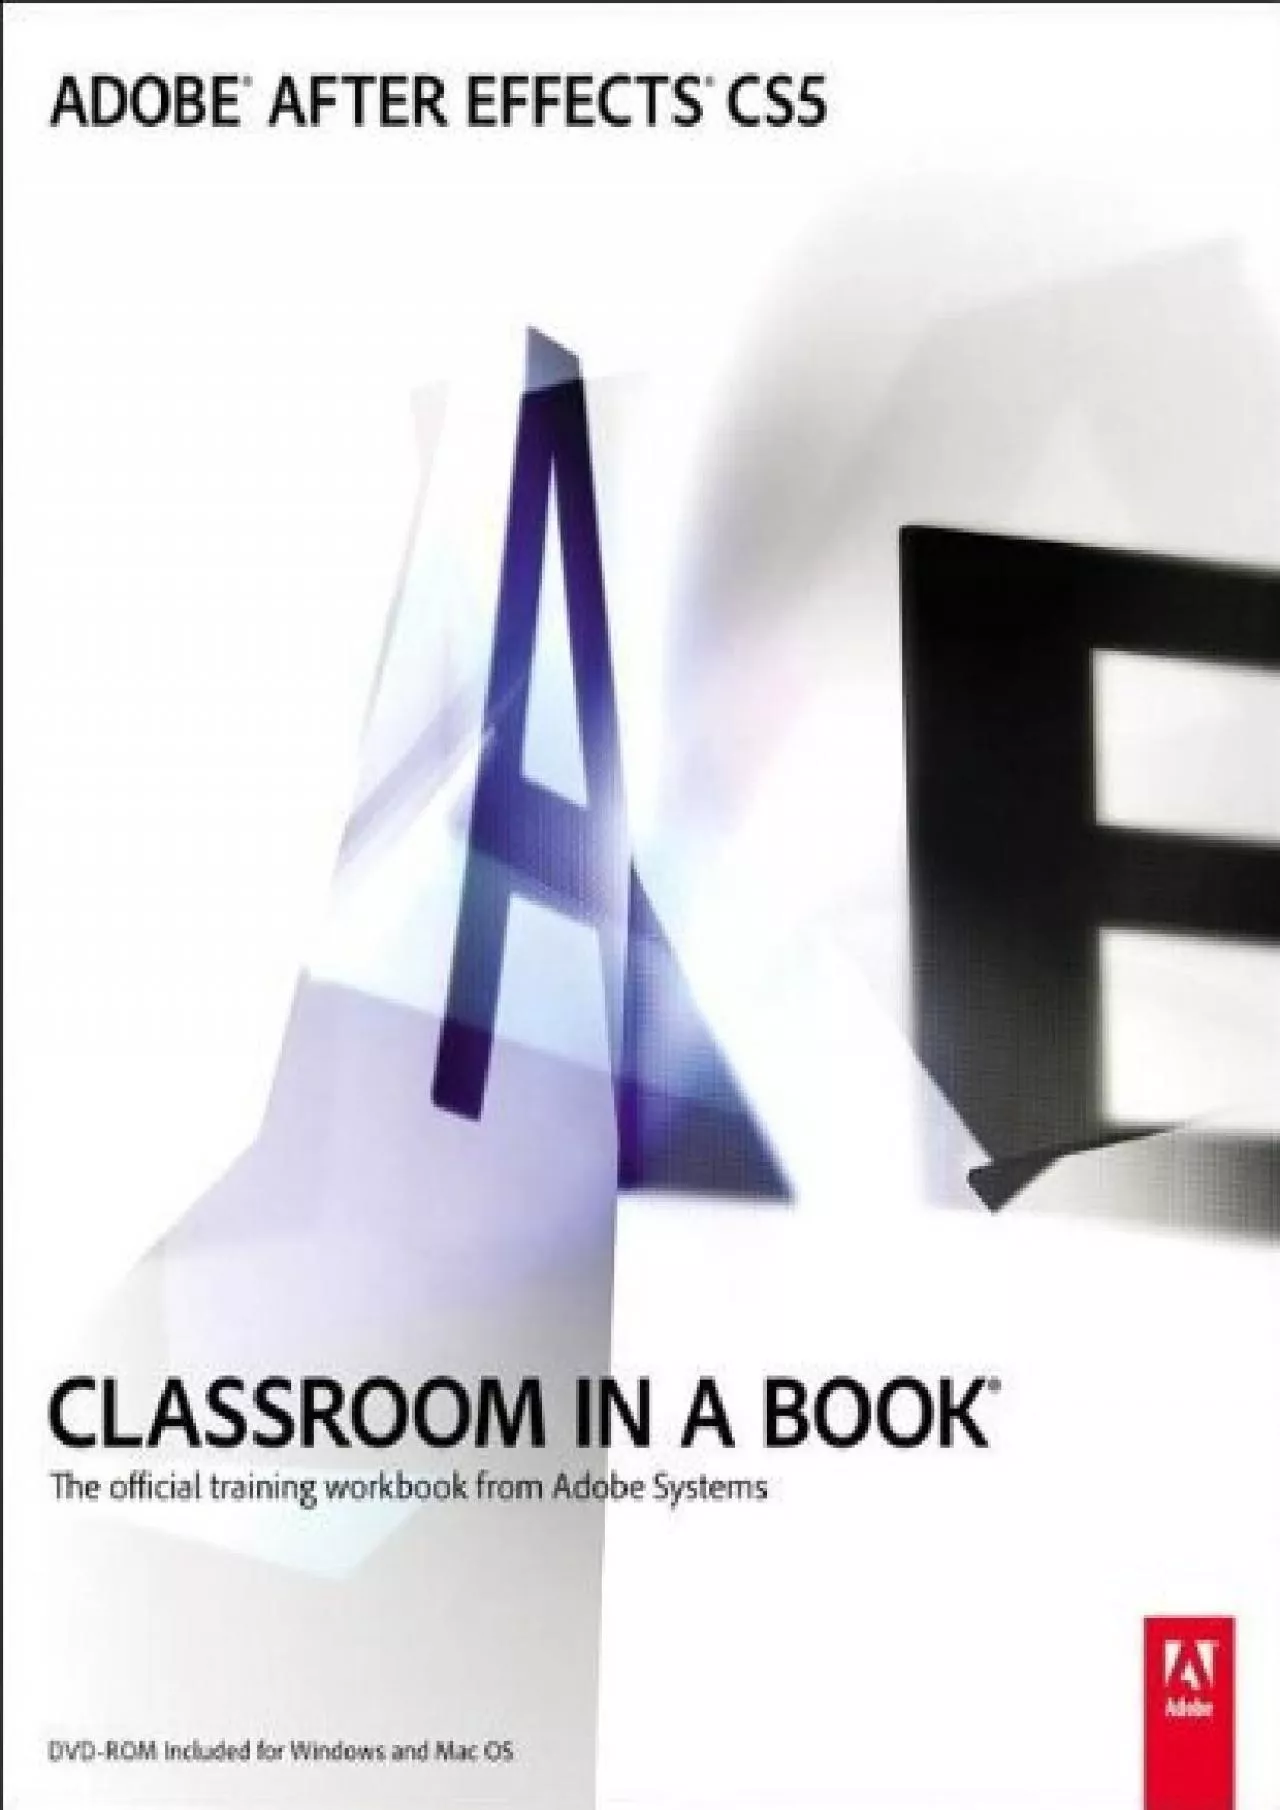 (BOOS)-Adobe After Effects CS5 Classroom in a Book: The Official Training Workbook from